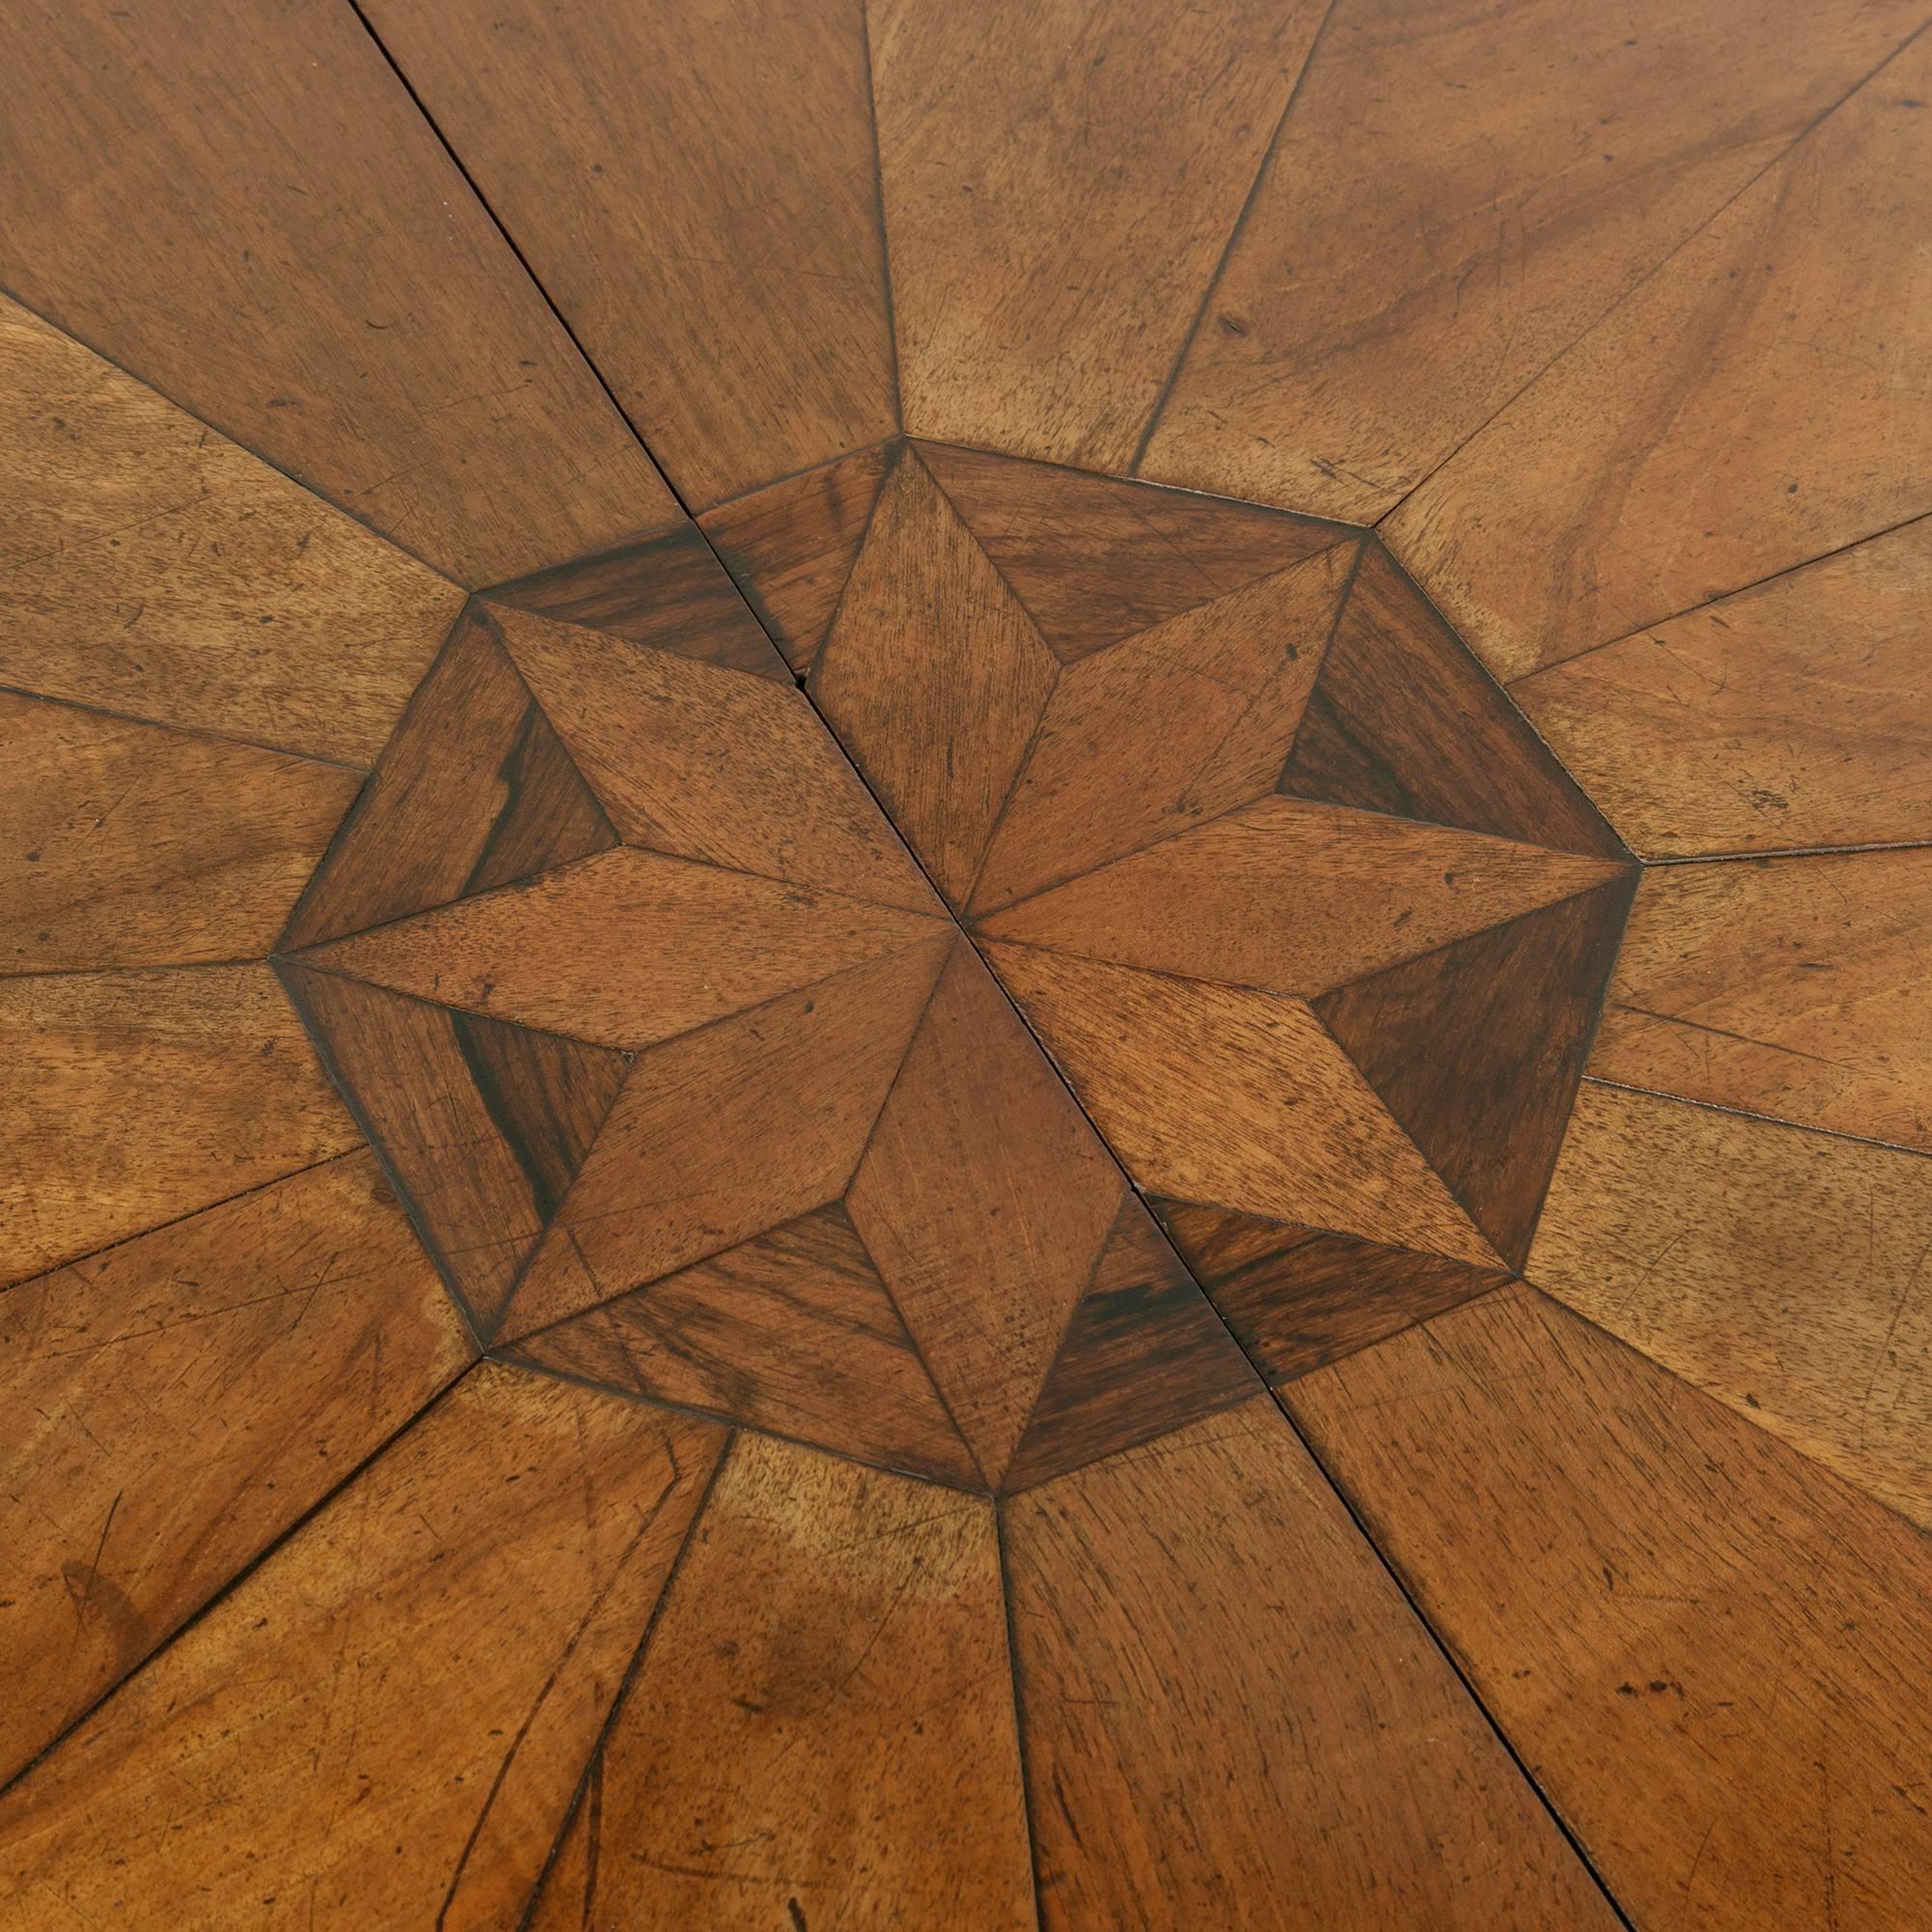 This Napoleon III period walnut gueridon or pedestal table is from the region of Alsace in eastern France. Its marquetry top is constructed of 16 walnut pieces that form a wheel around a central medallion of an eight pointed star inlaid in